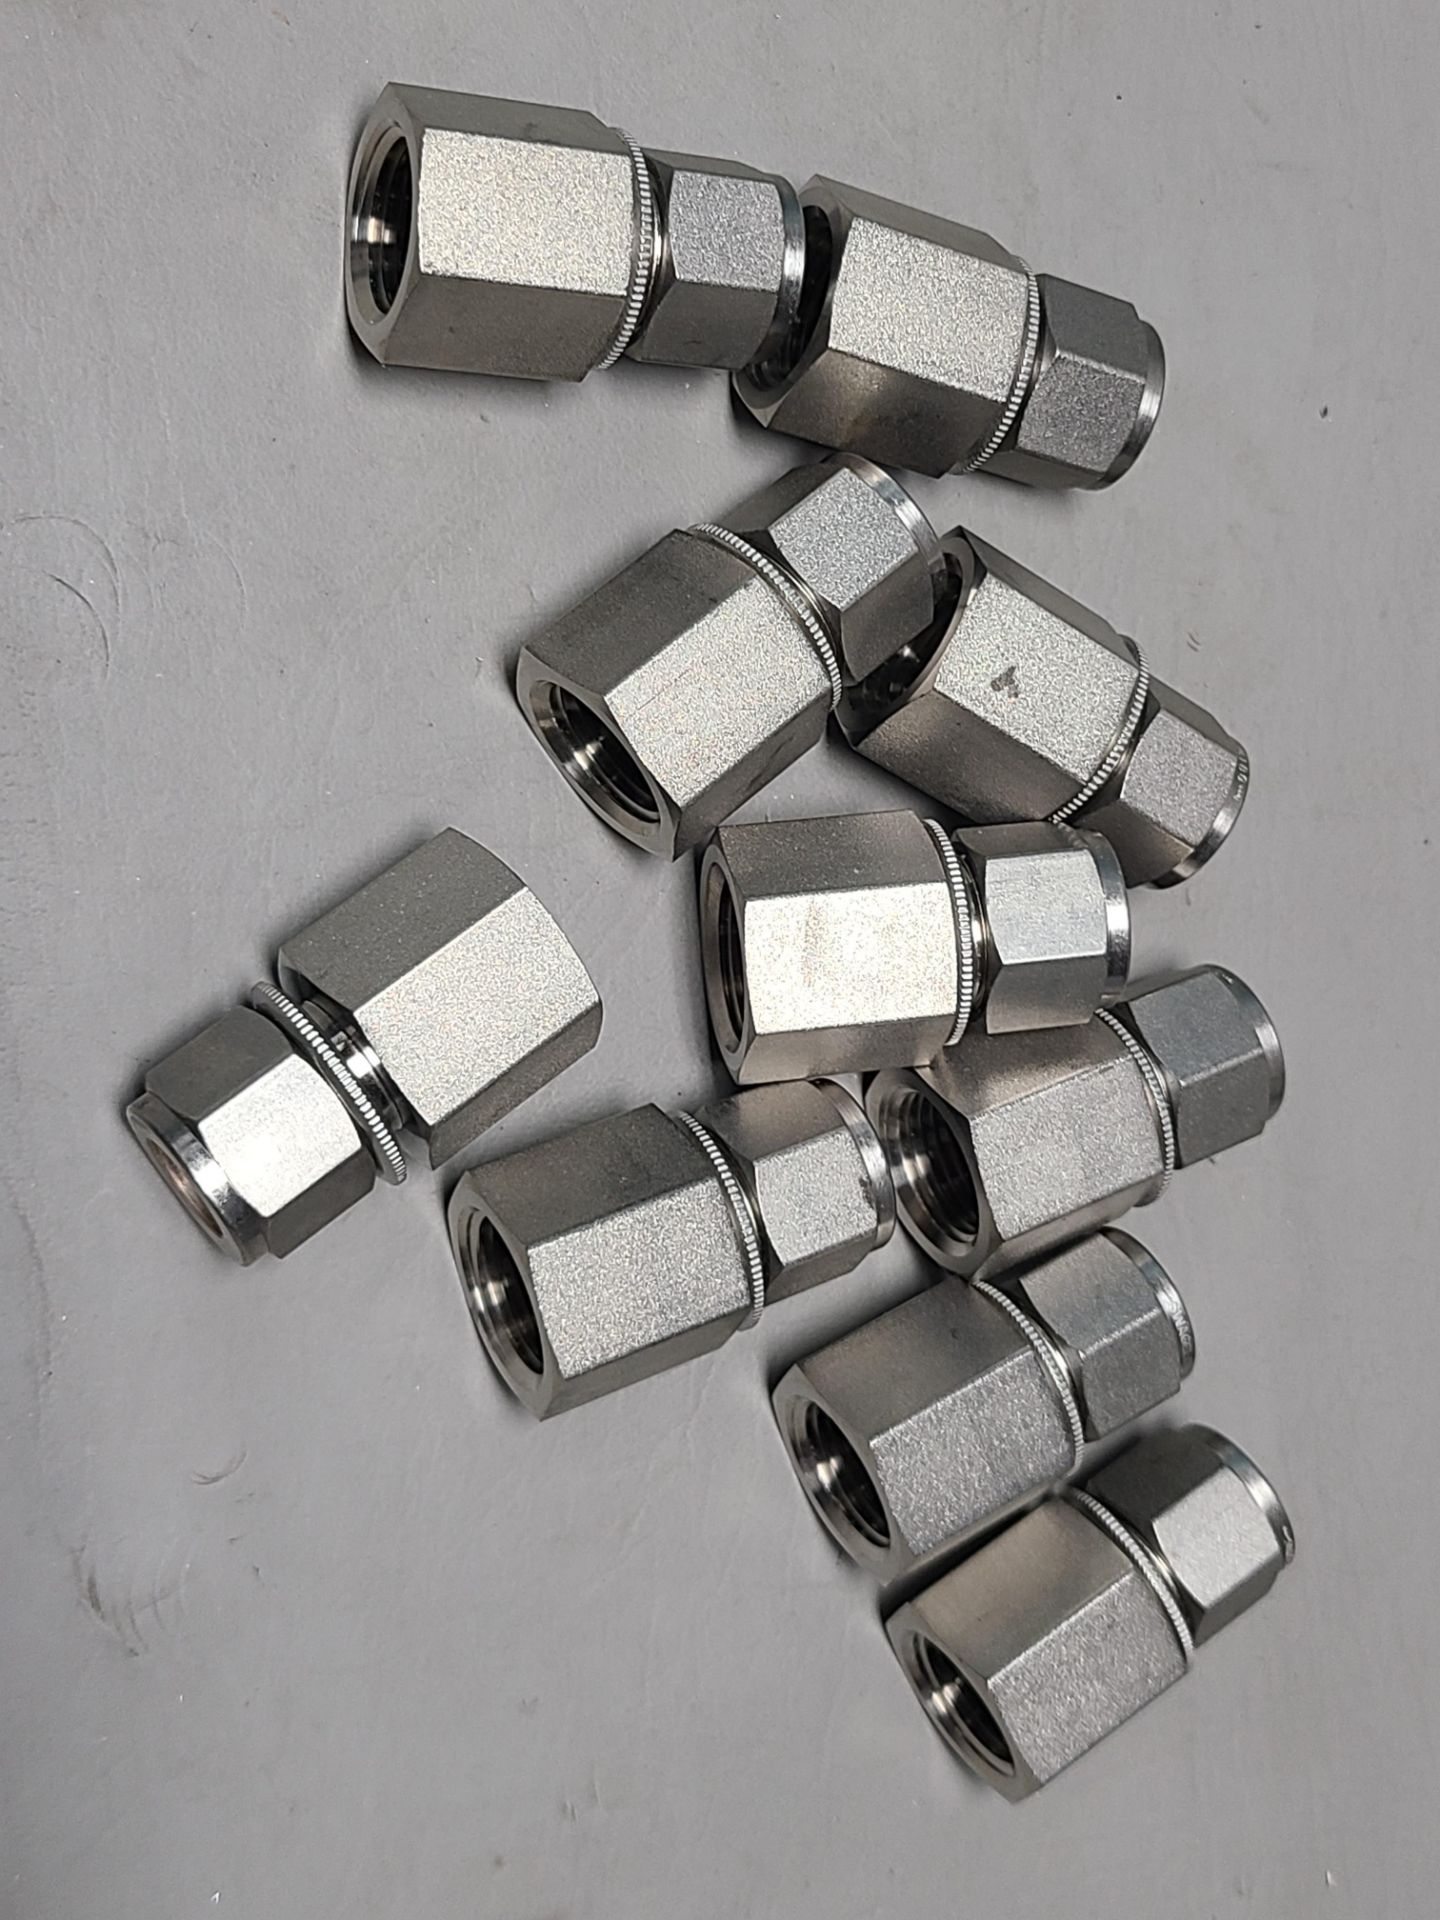 LOT OF SWAGELOK STAINLESS STEEL FITTINGS - Image 2 of 5